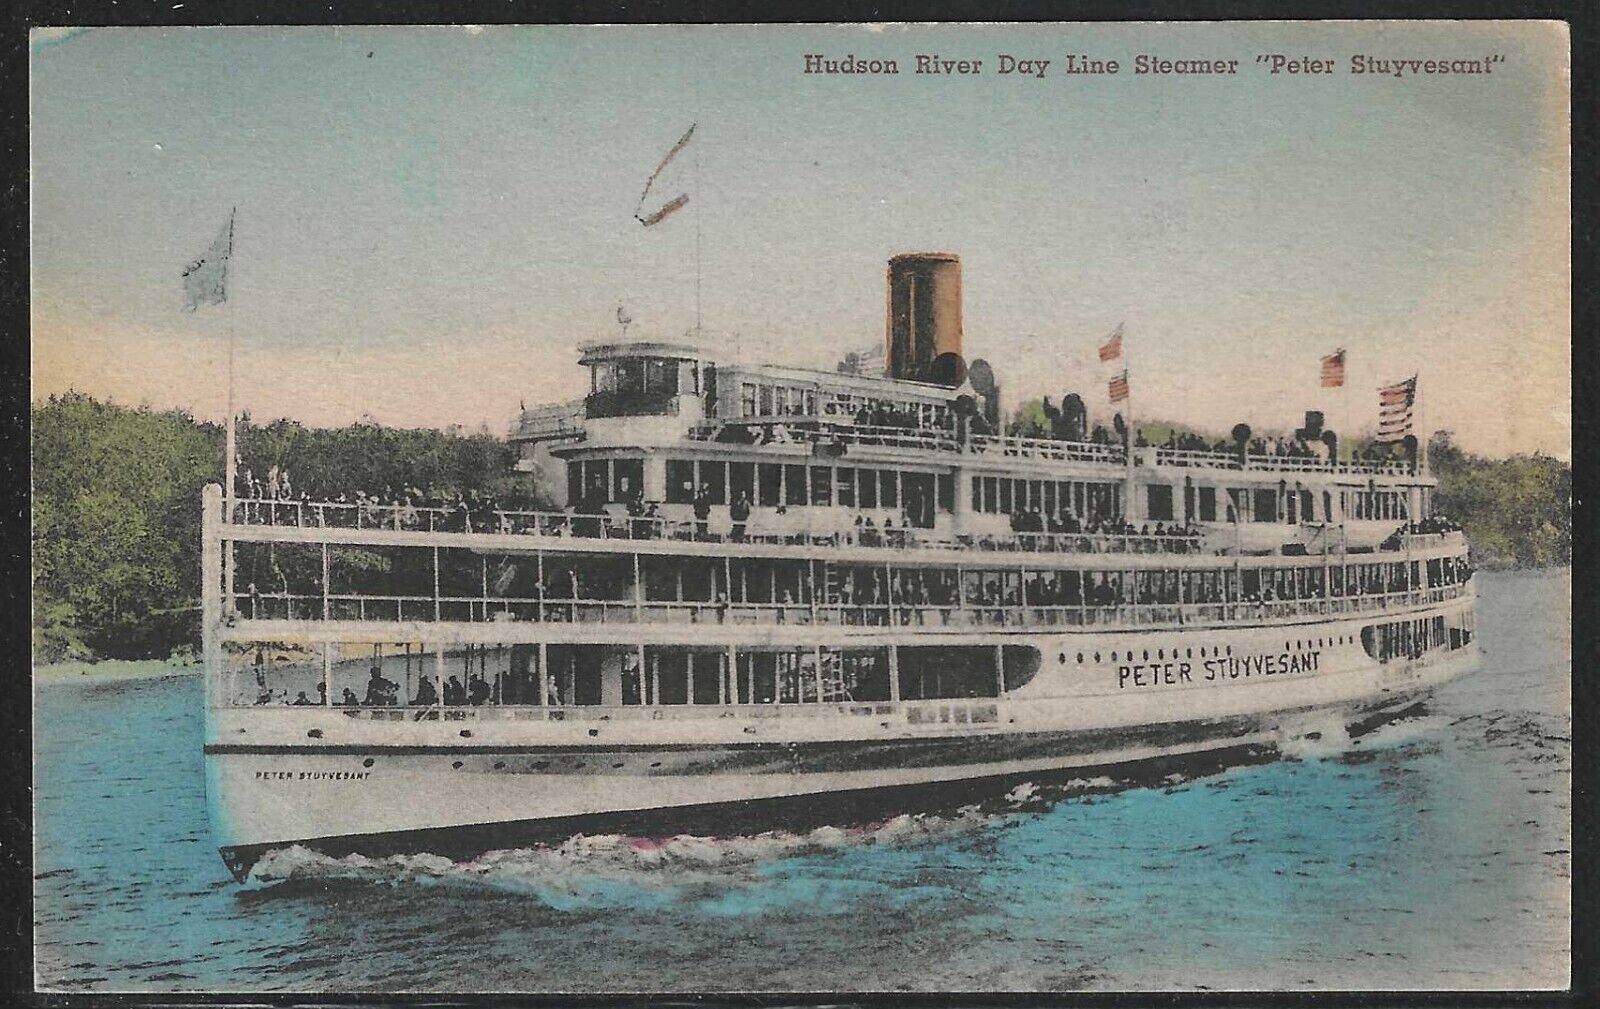 Peter Stuyvesant, Hudson River Day Line Steamer, Early Hand Colored Postcard